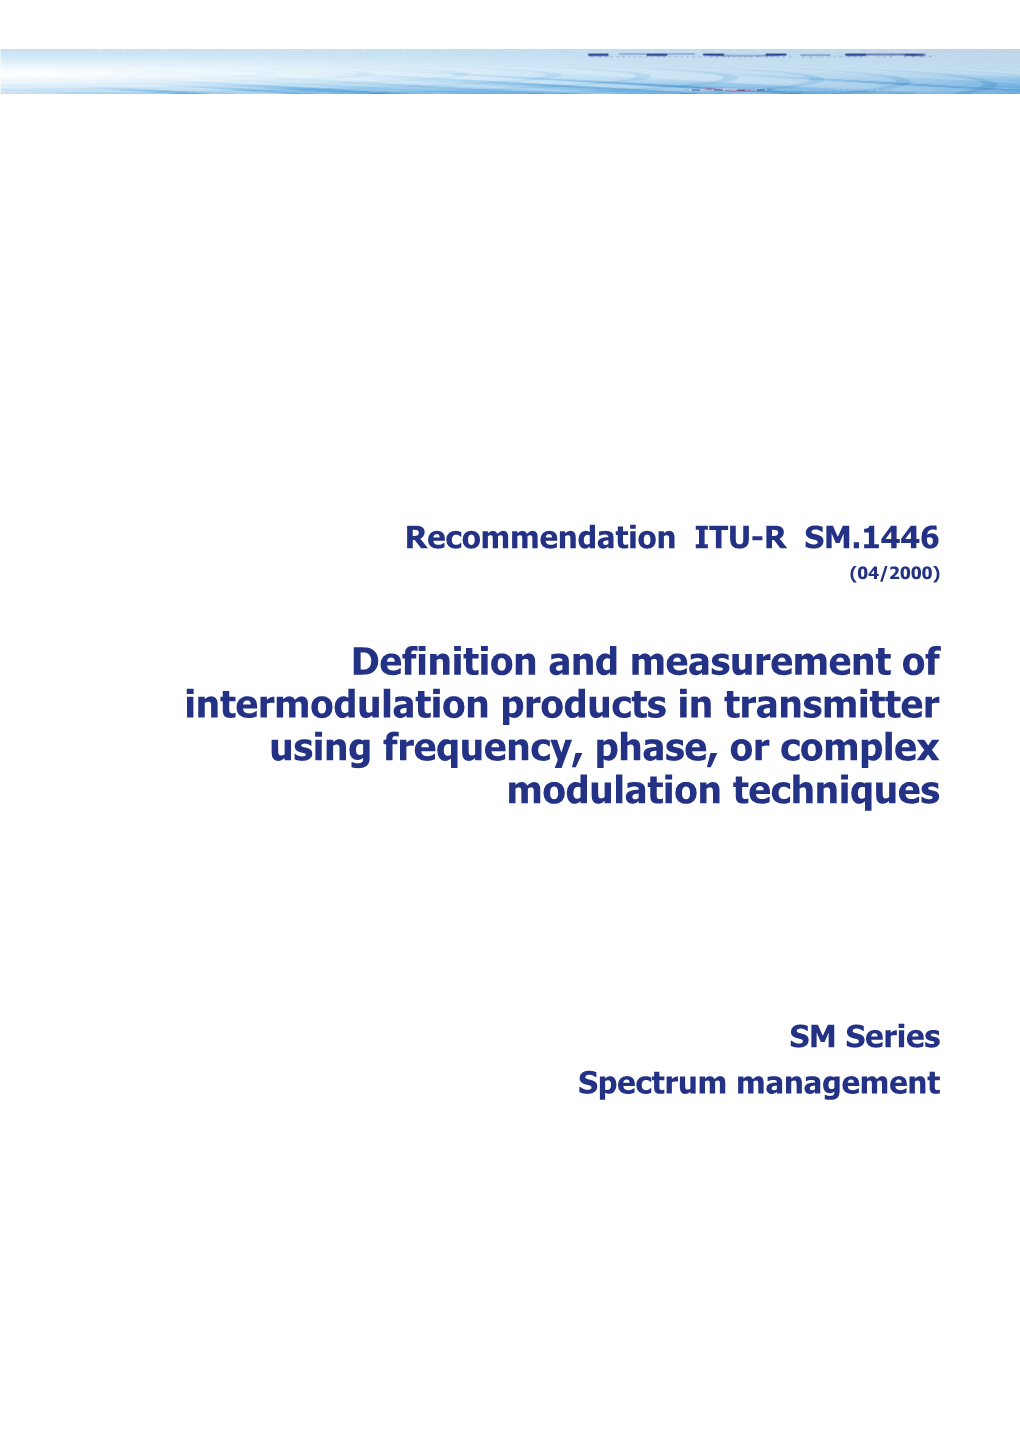 SM.1446 - Definition and Measurement of Intermodulation Products in Transmitter Using Frequency